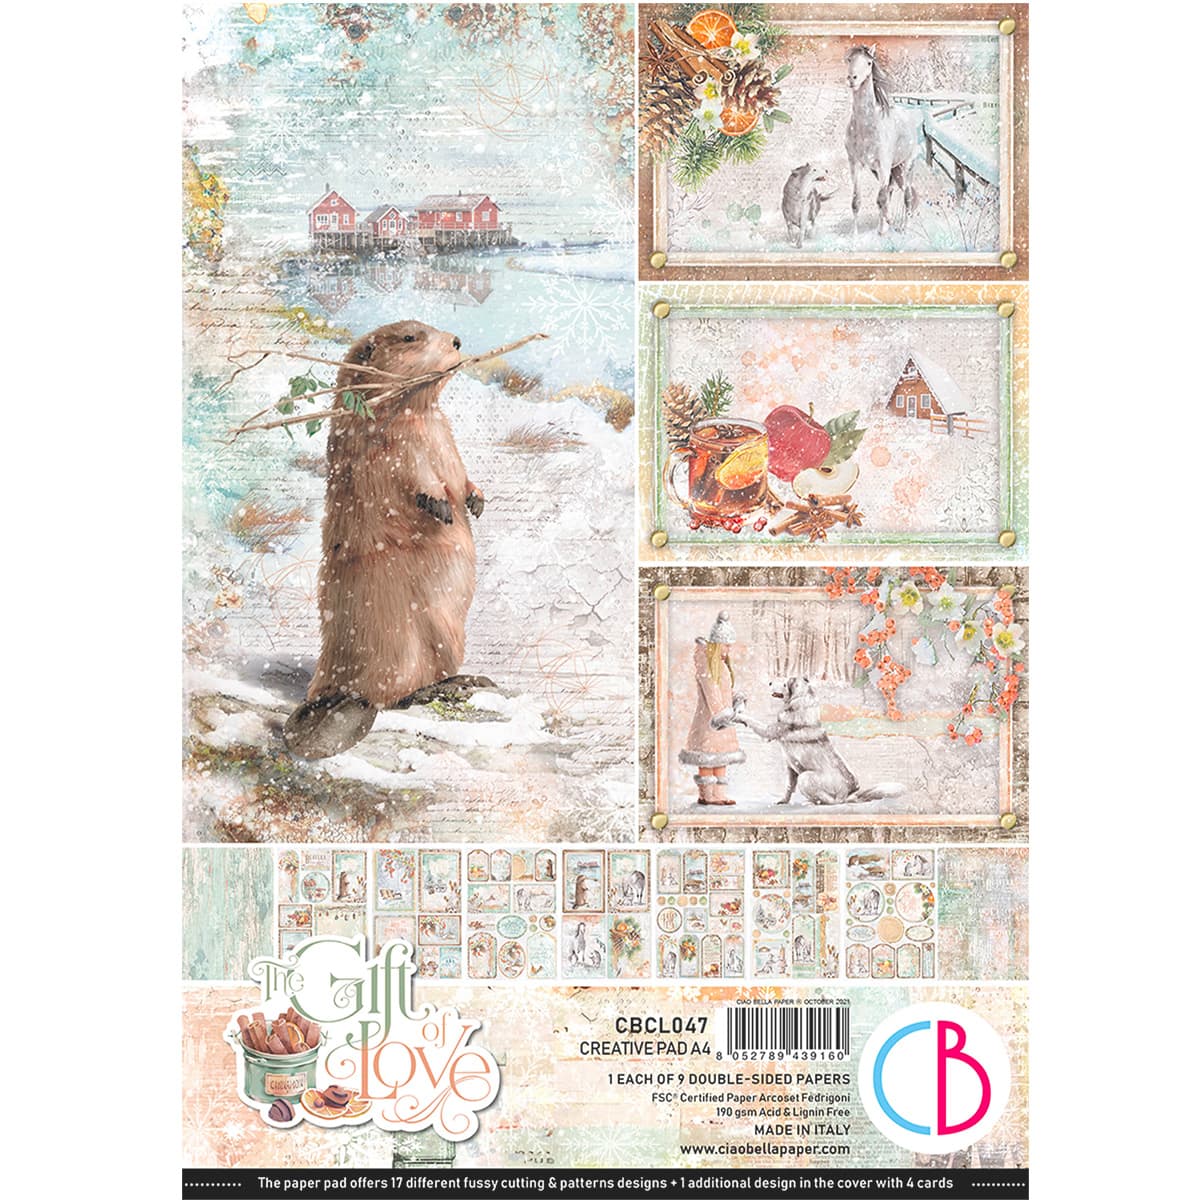 Ciao Bella - The gift of love - Paper Pad  - A4